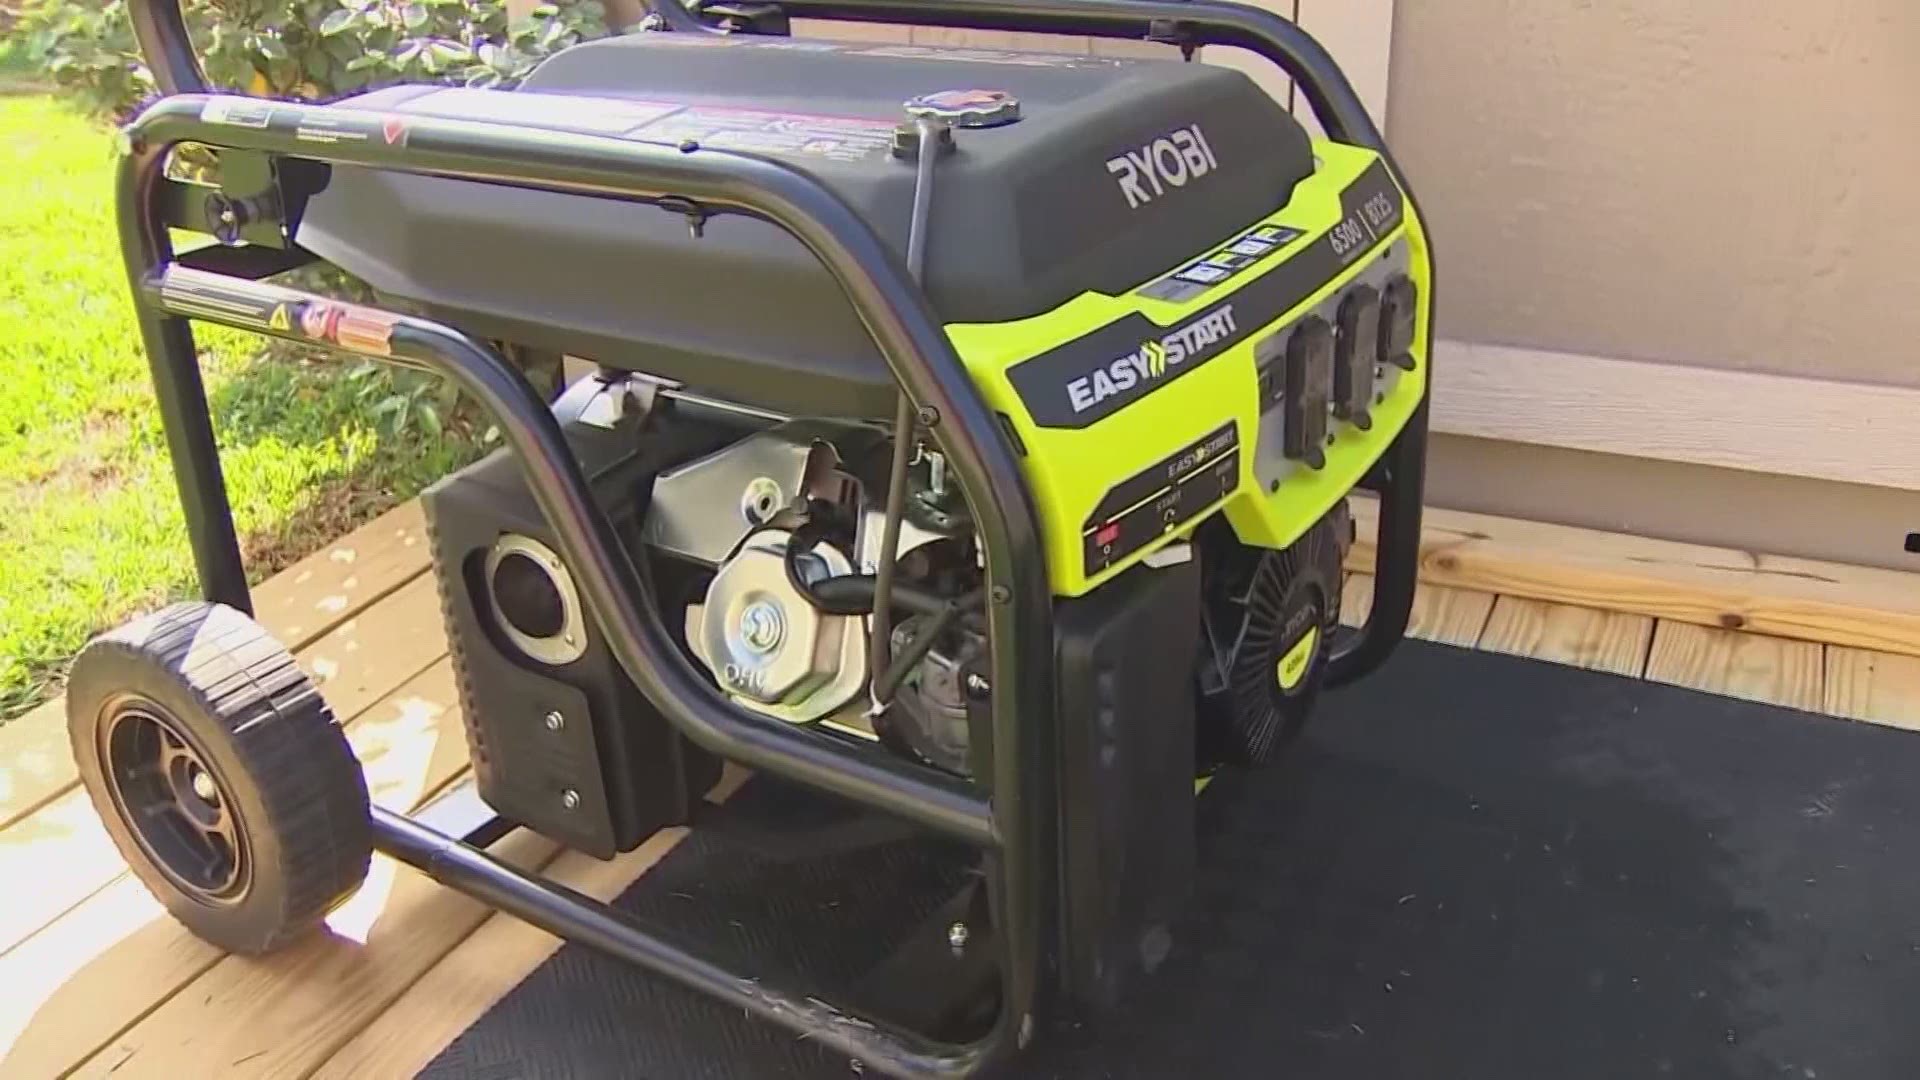 Generators are the primary source of power for many impacted by Hurricane Ida, but are capable or causing burns, fires, carbon monoxide poisonings and more.